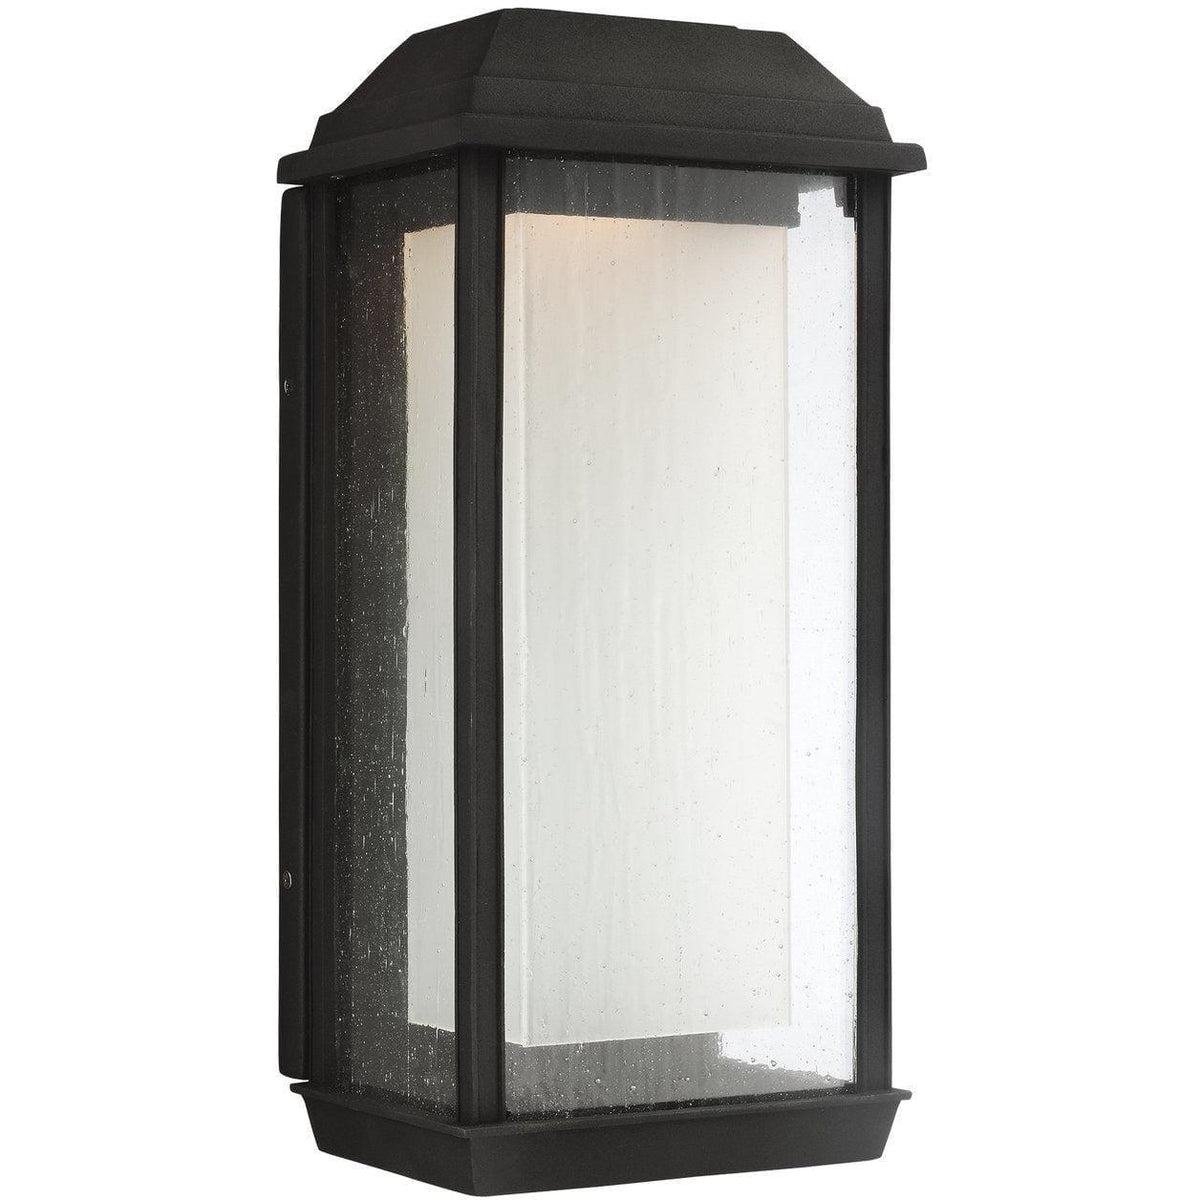 Generation Lighting - McHenry LED Outdoor Wall Sconce - OL12802TXB-L1 | Montreal Lighting & Hardware